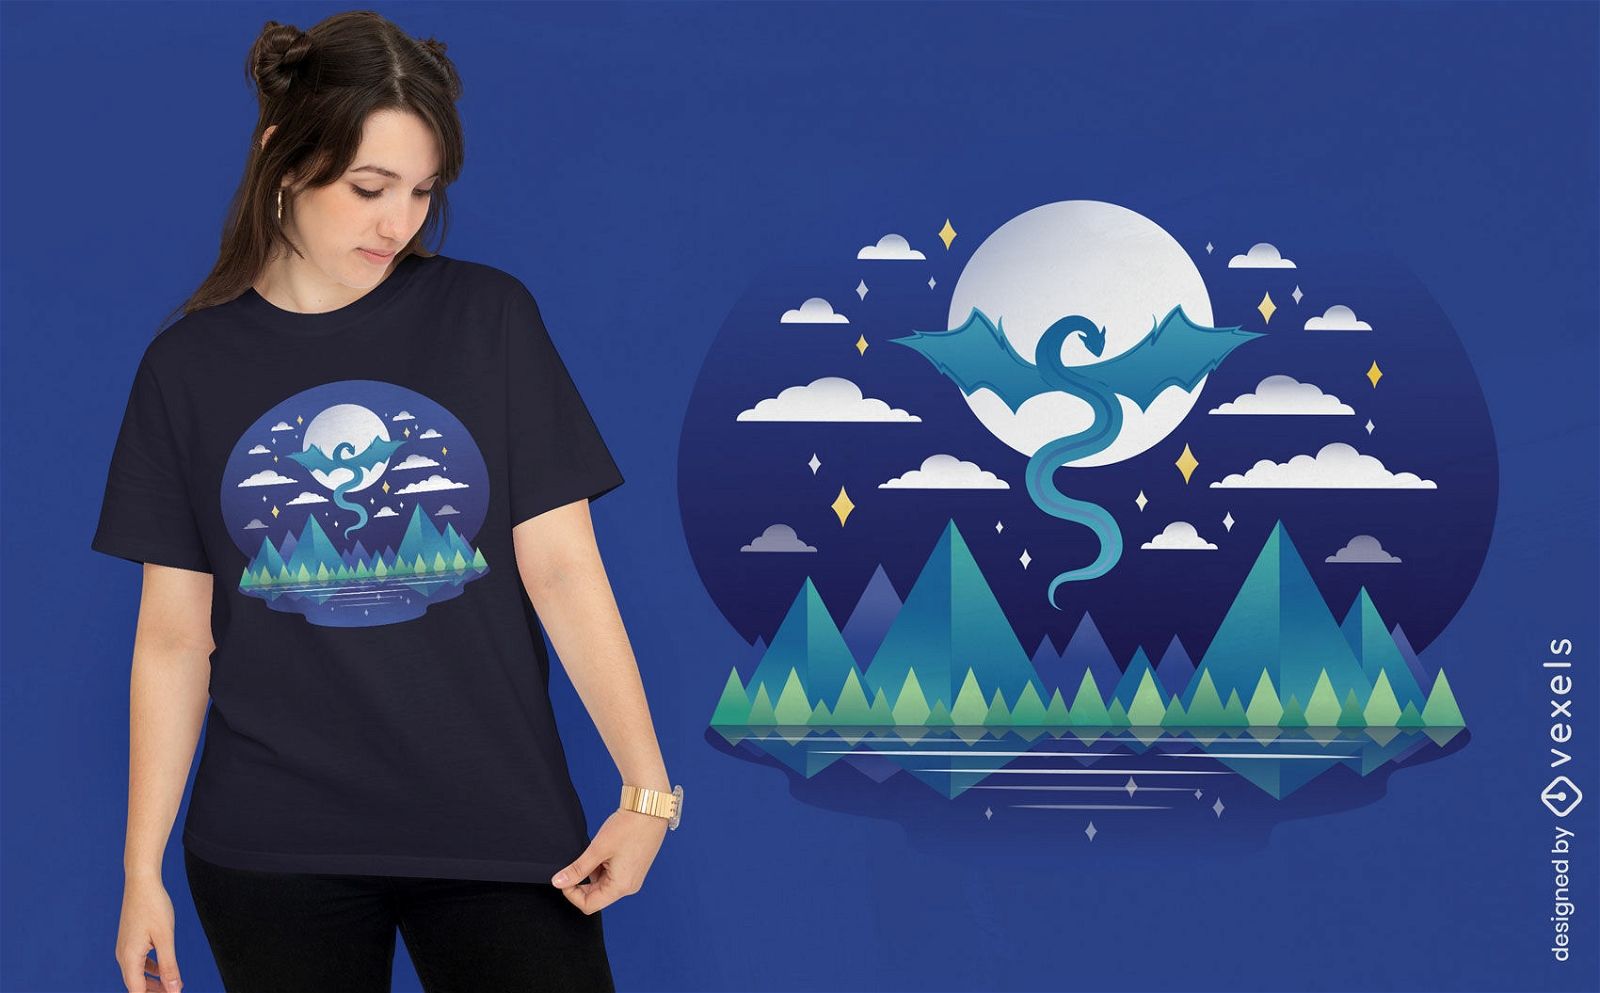 Dragon flying over mountains t-shirt design